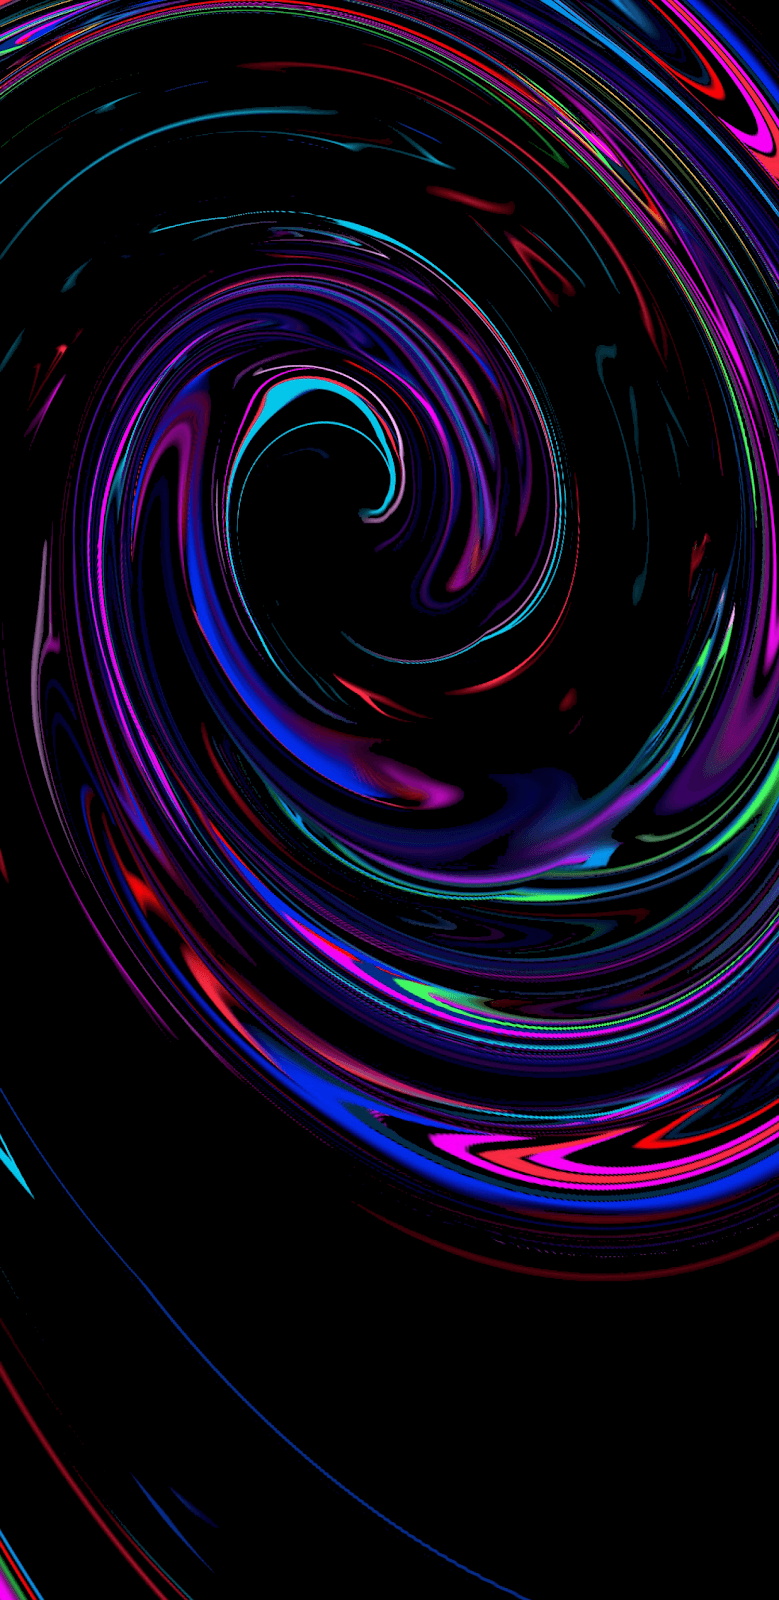 Infinity (for Amoled display) #wallpaper #iphone #android. Dark background wallpaper, Cellphone wallpaper, Abstract wallpaper